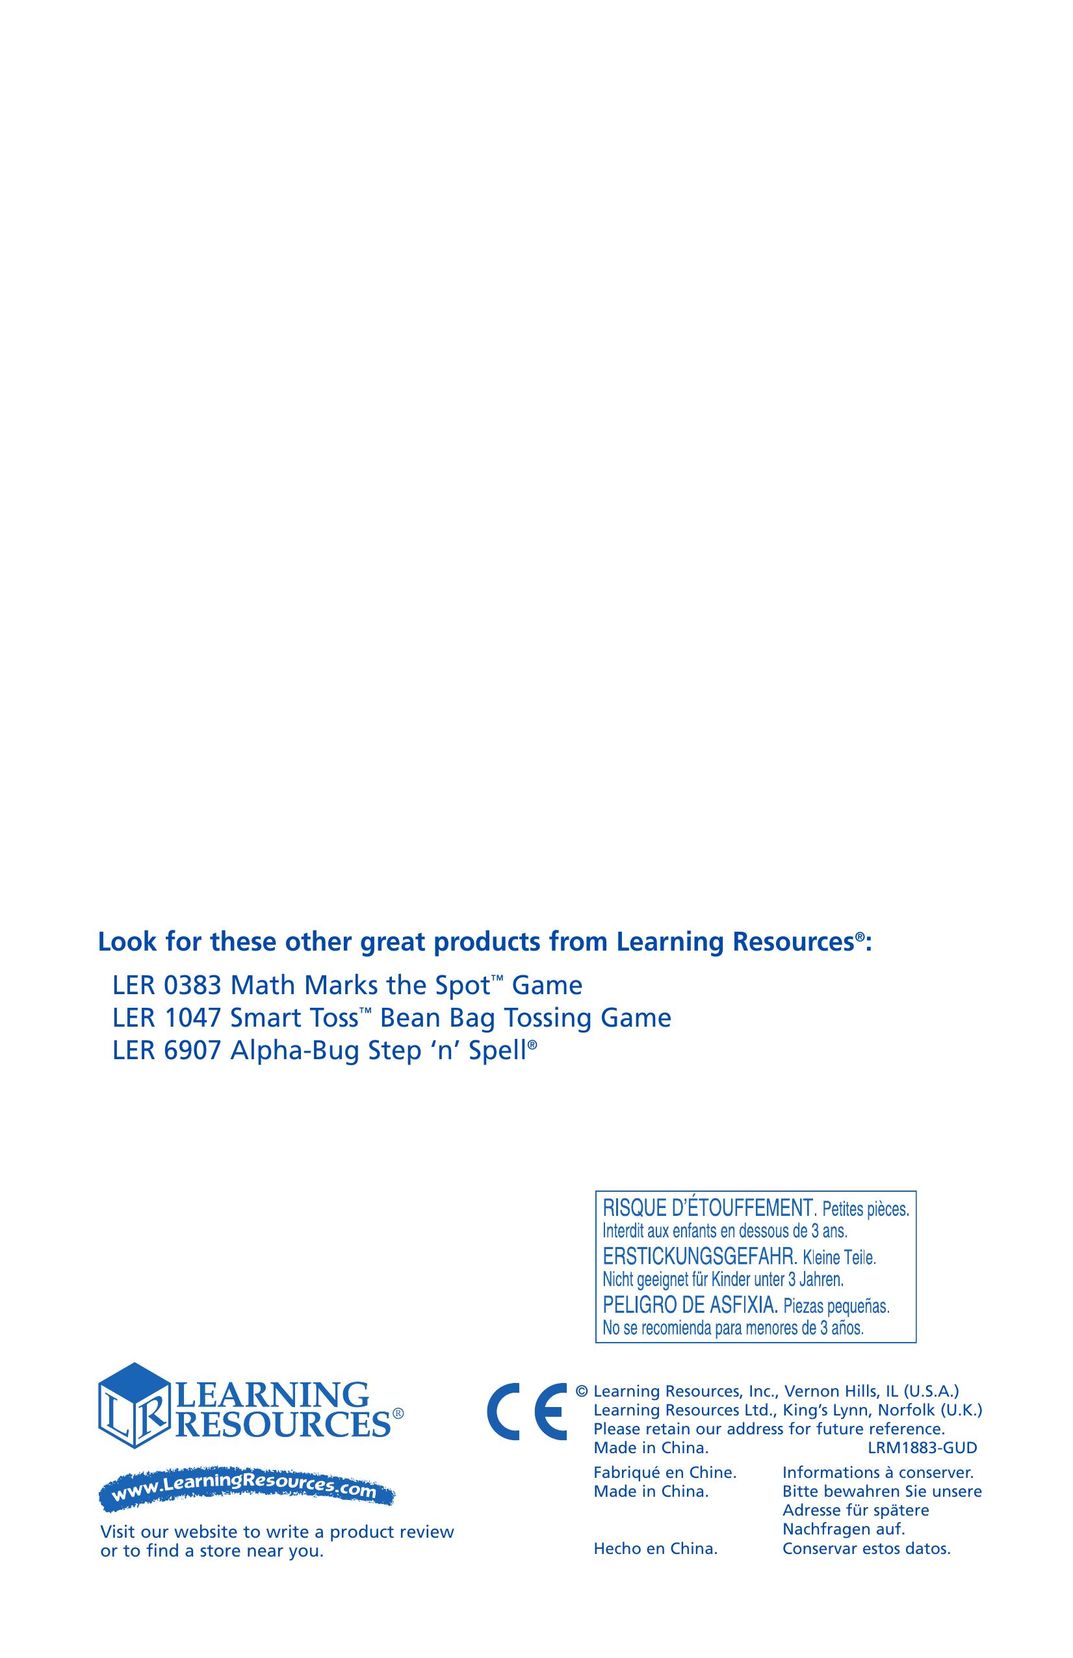 Learning Resources LER 1883 Baby Toy User Manual